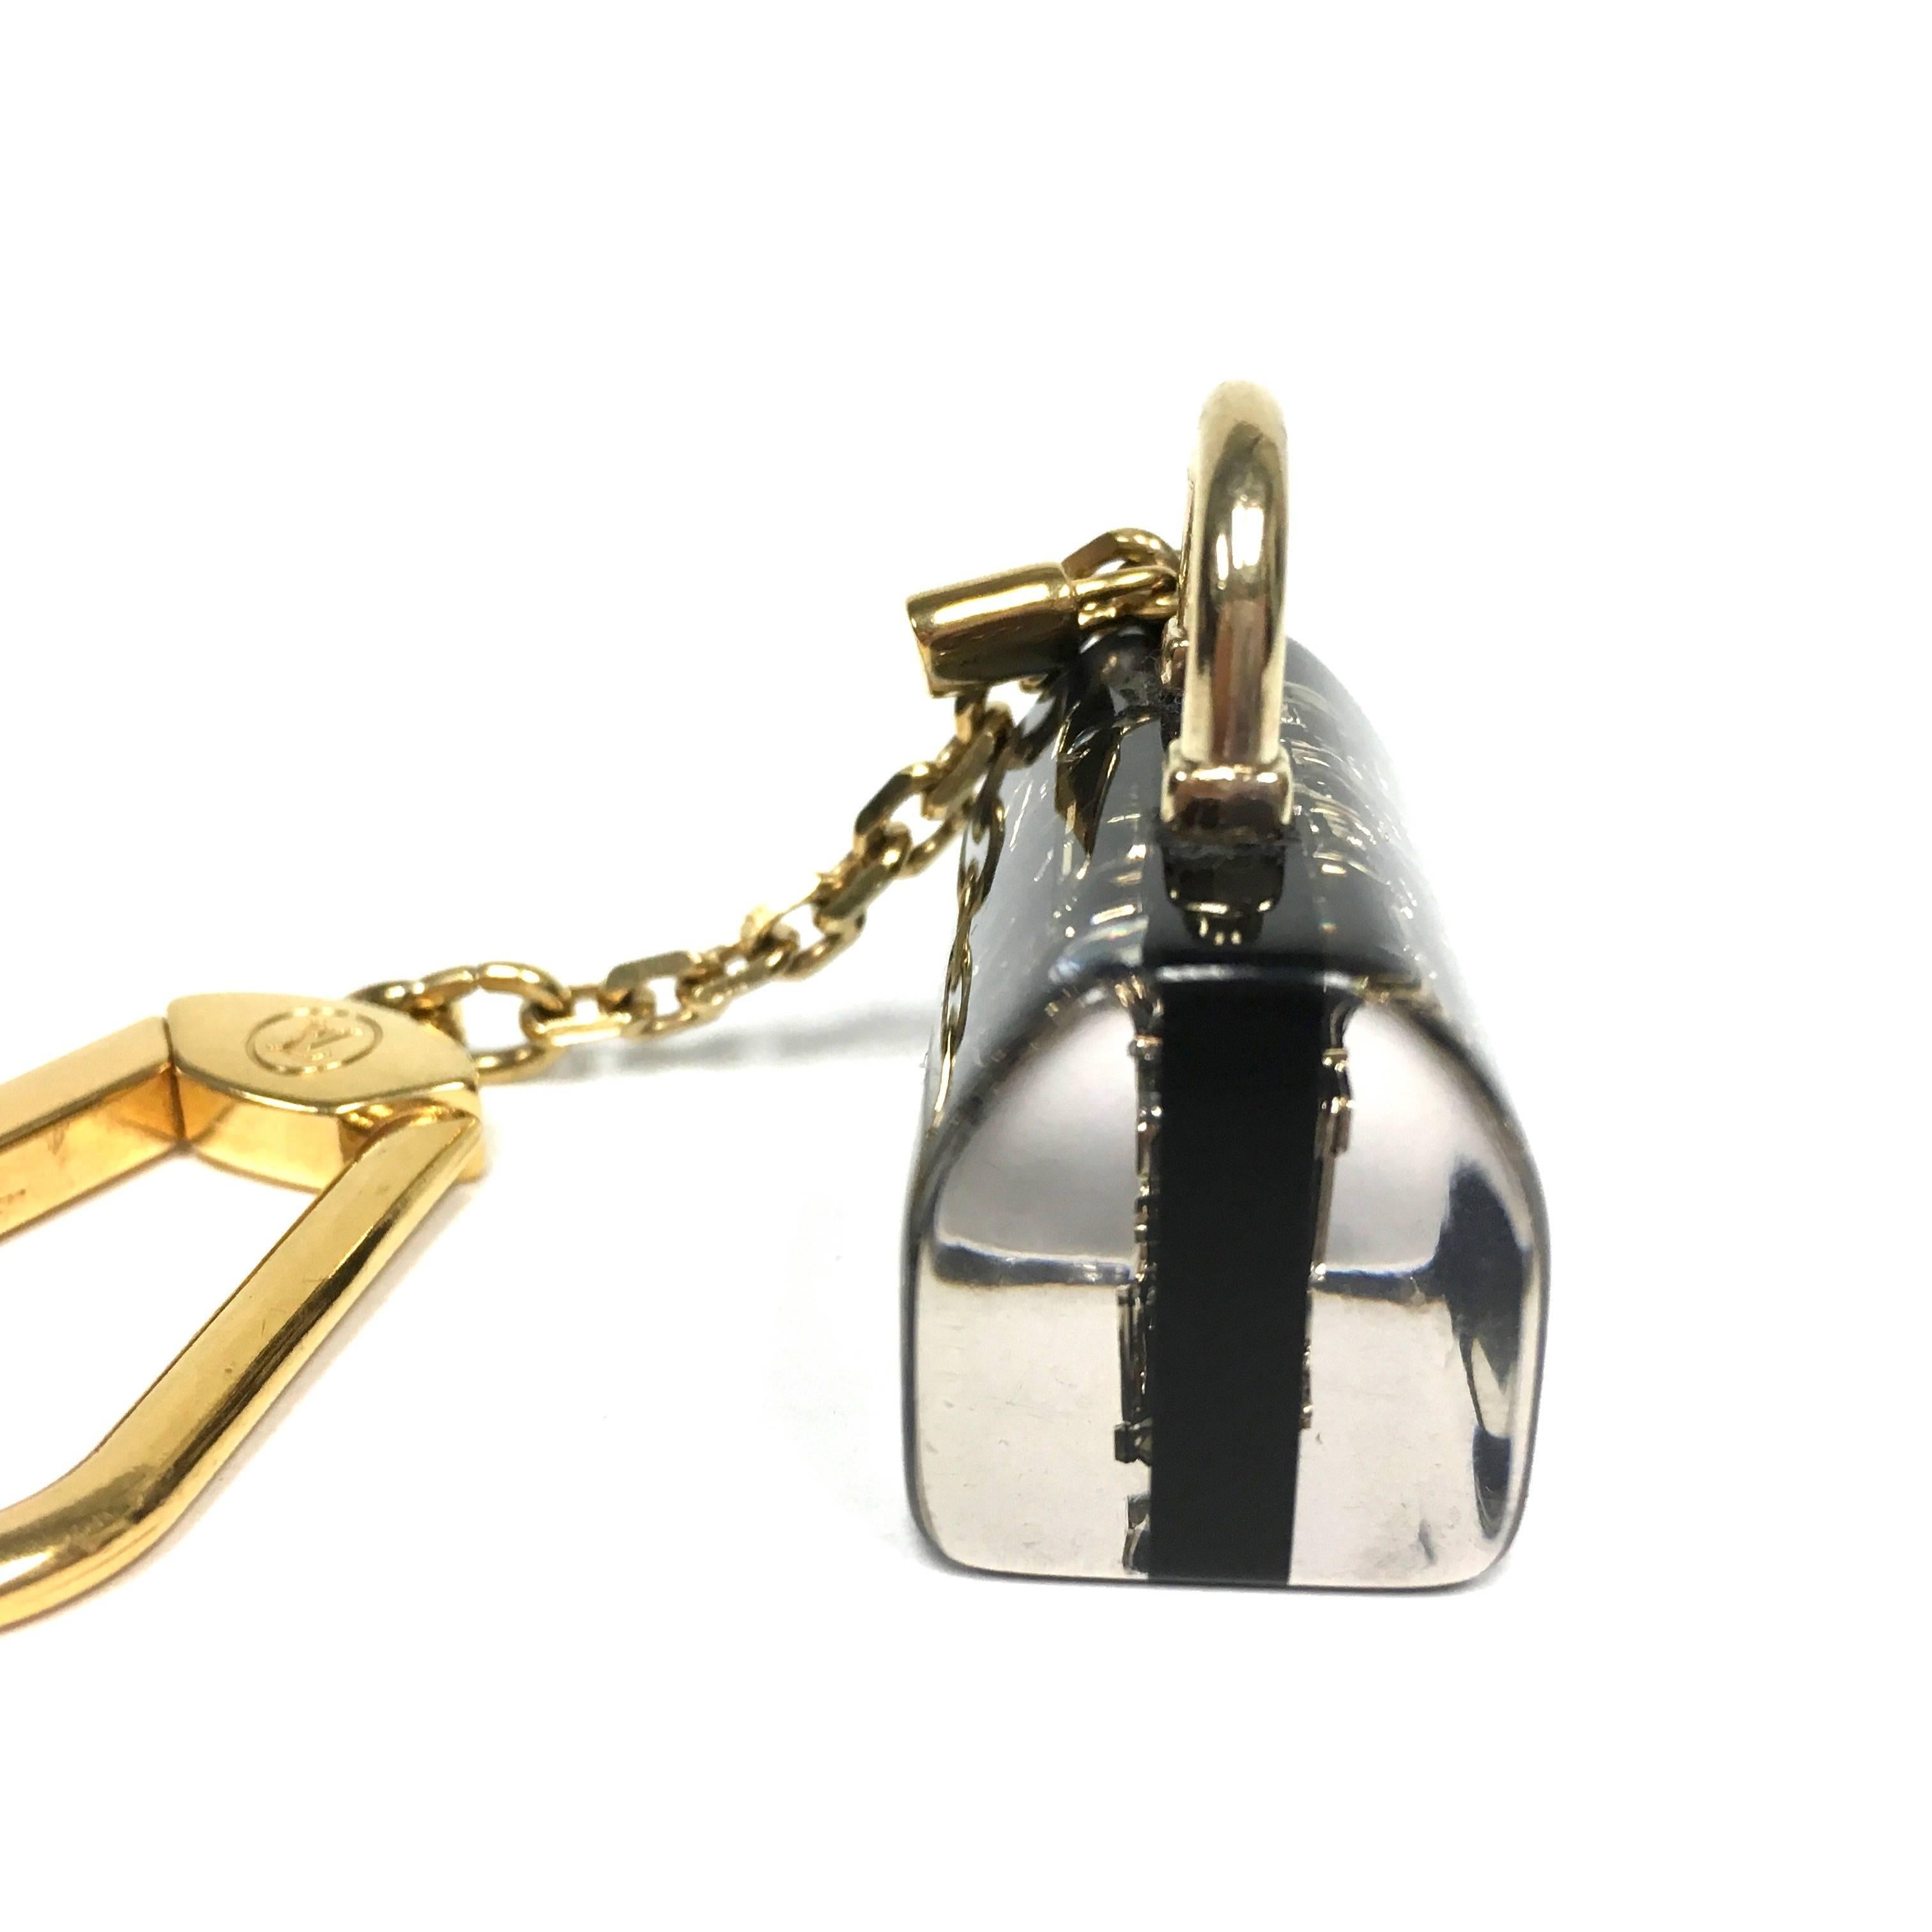 LOUIS VUITTON Inclusion Black and Gold Speedy Bag Charm. 
This chic key chain is composed of a black and clear resin Speedy charm with a gold snap hook and chain. The charm is embellished with gold monogram symbols and assorted crystals.